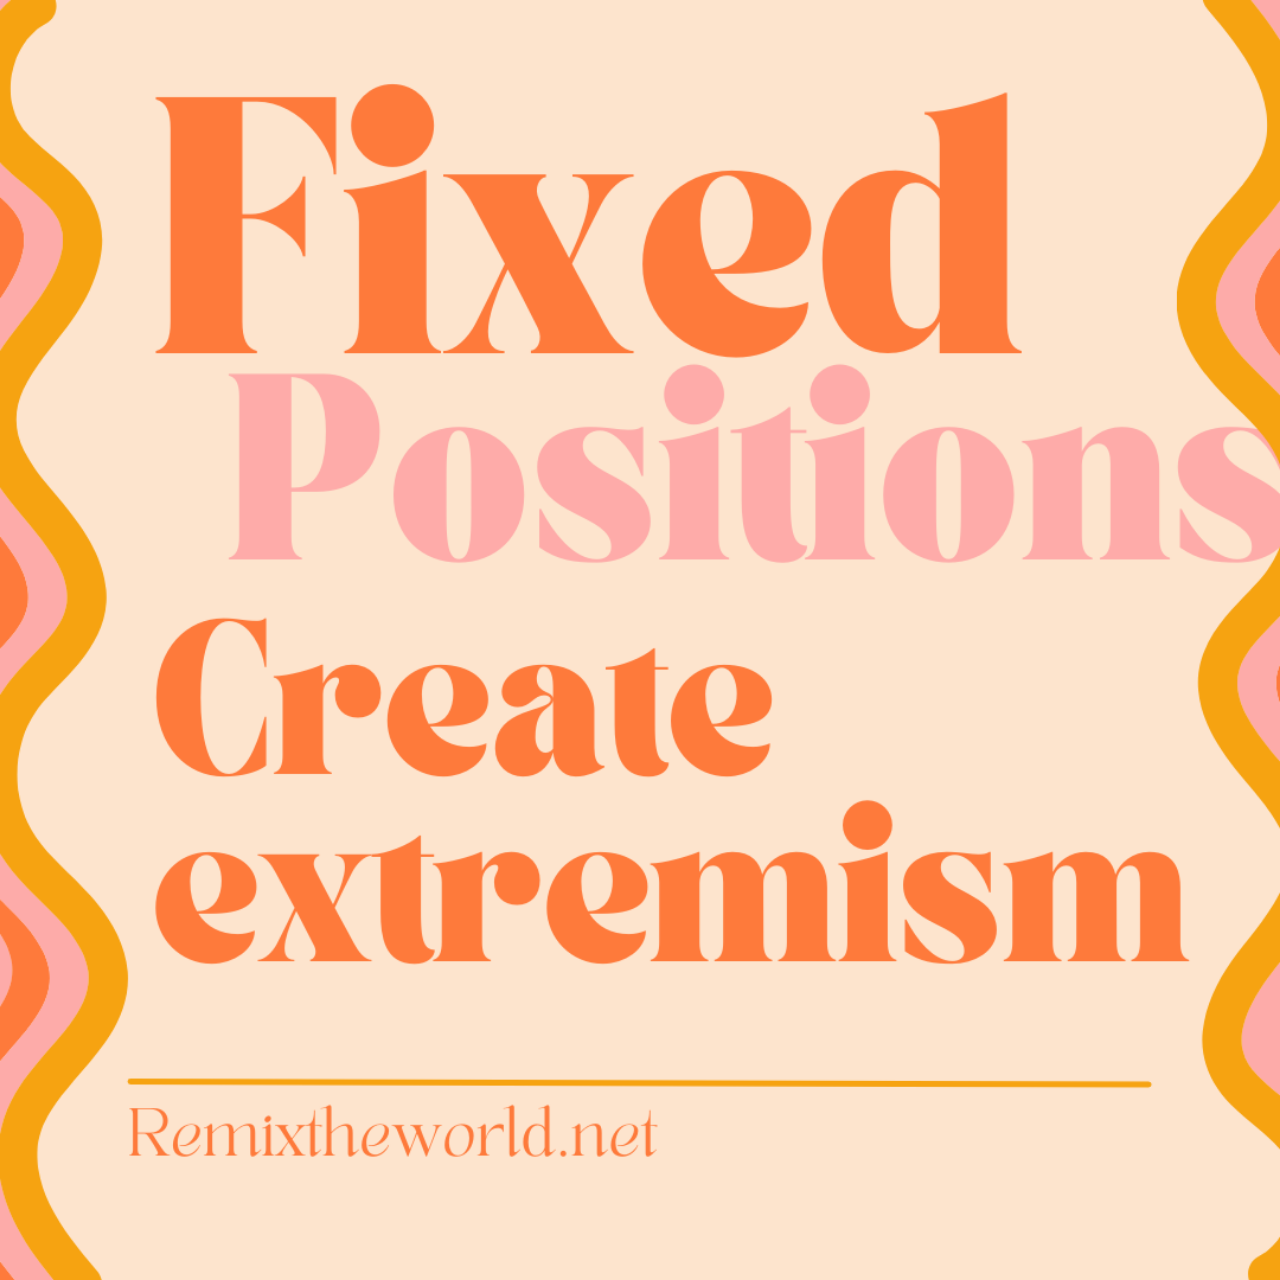 FIXED POSITIONS CREATE EXTREMISM